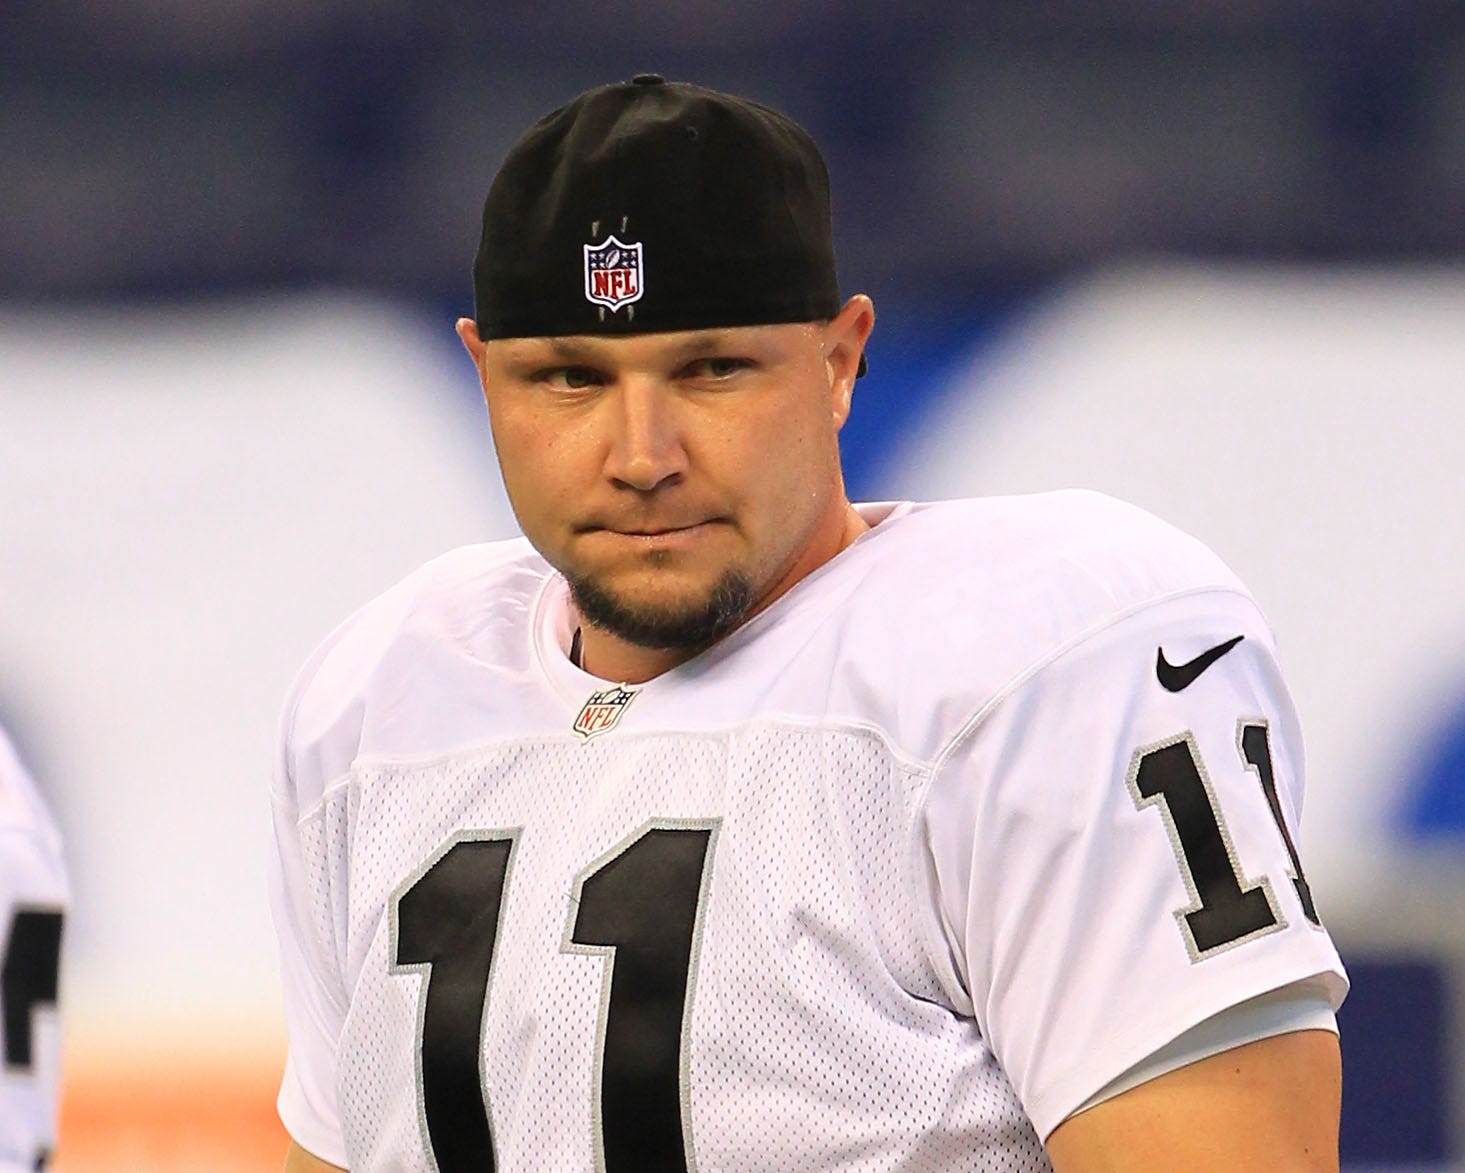 Sebastian Janikowski signs two-year contract with Seahawks